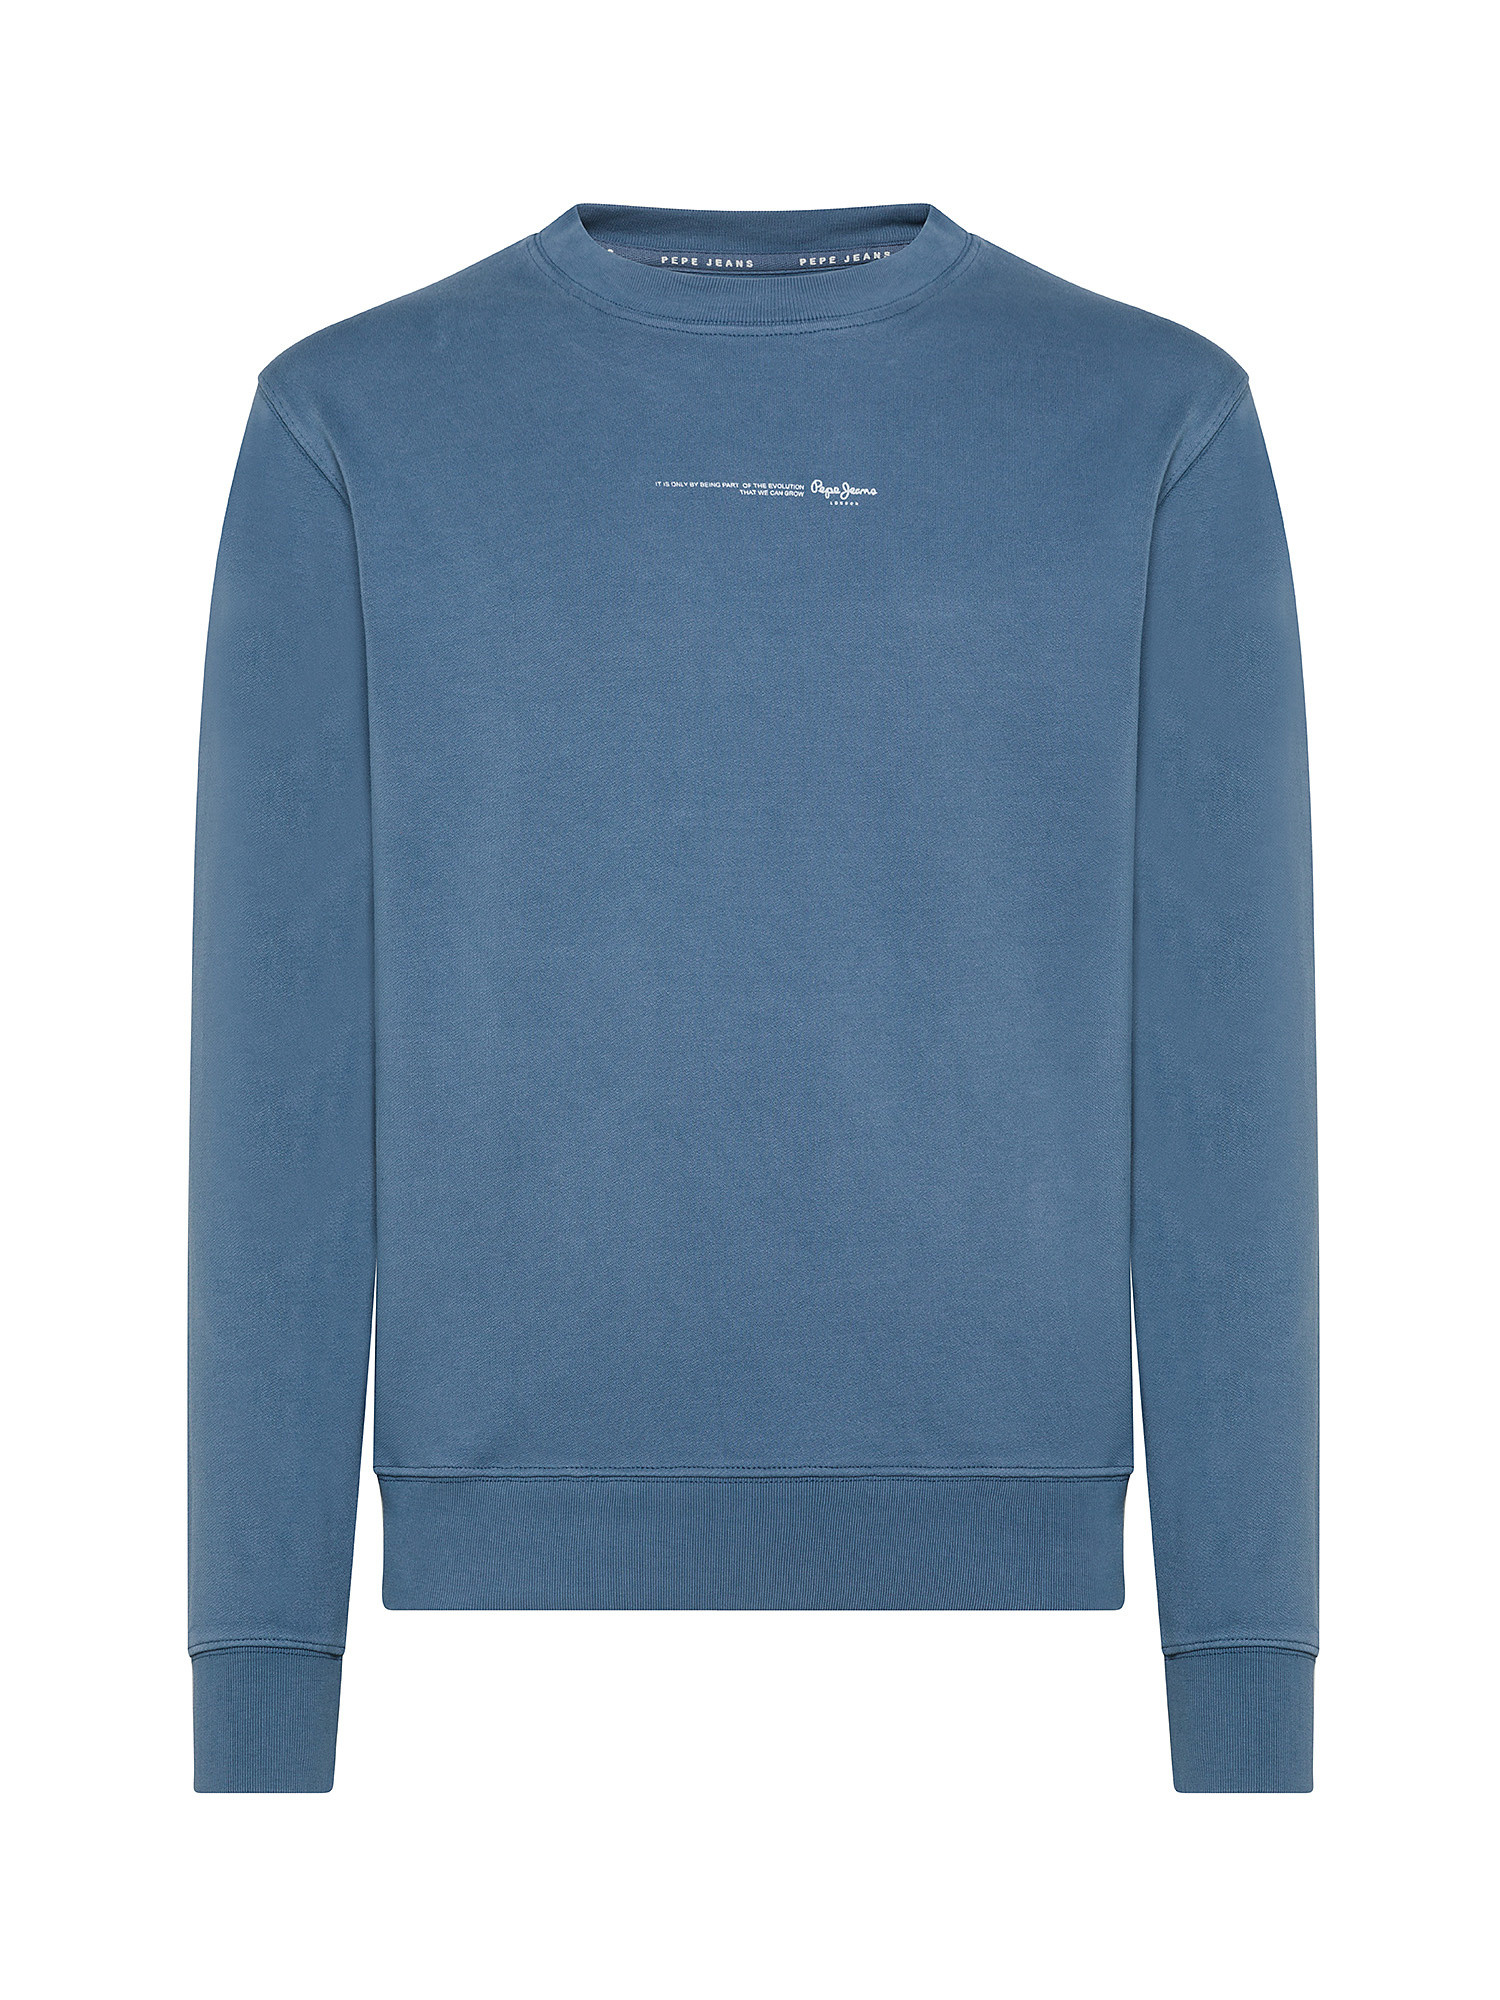 Pepe Jeans - Cotton sweatshirt with logo, Blue, large image number 0